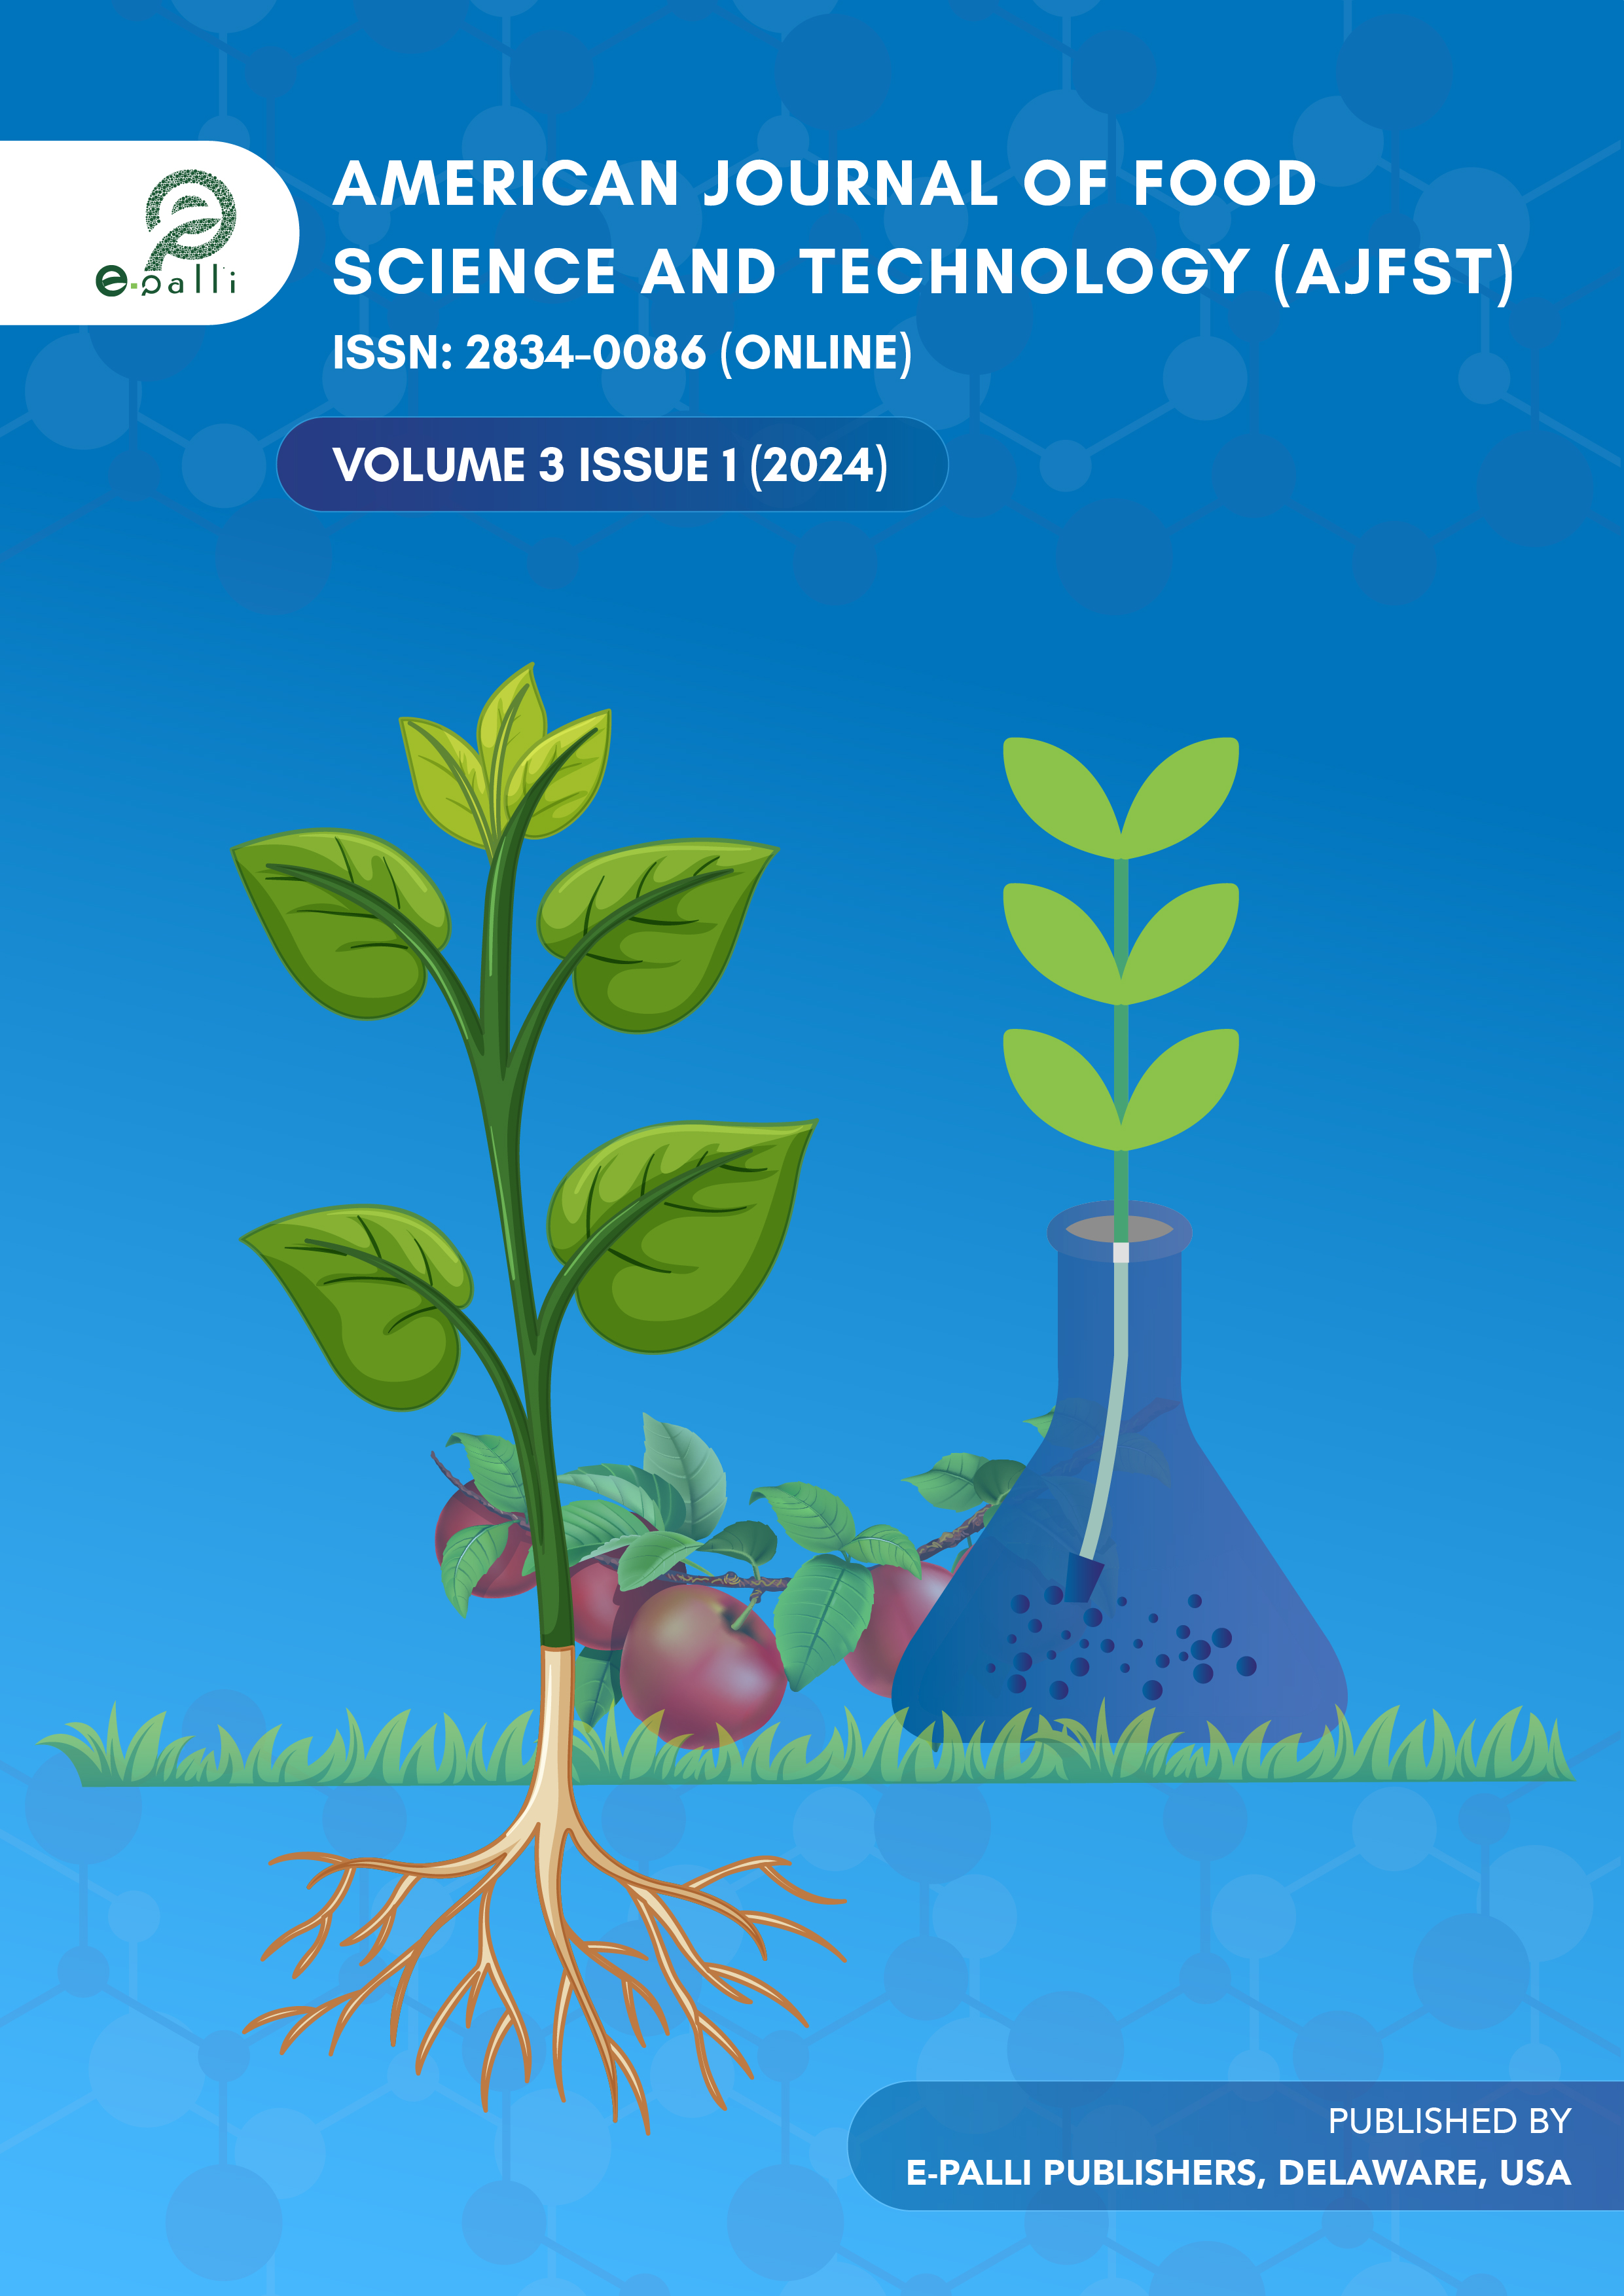                     View Vol. 3 No. 1 (2024): American Journal of Food Science and Technology 
                